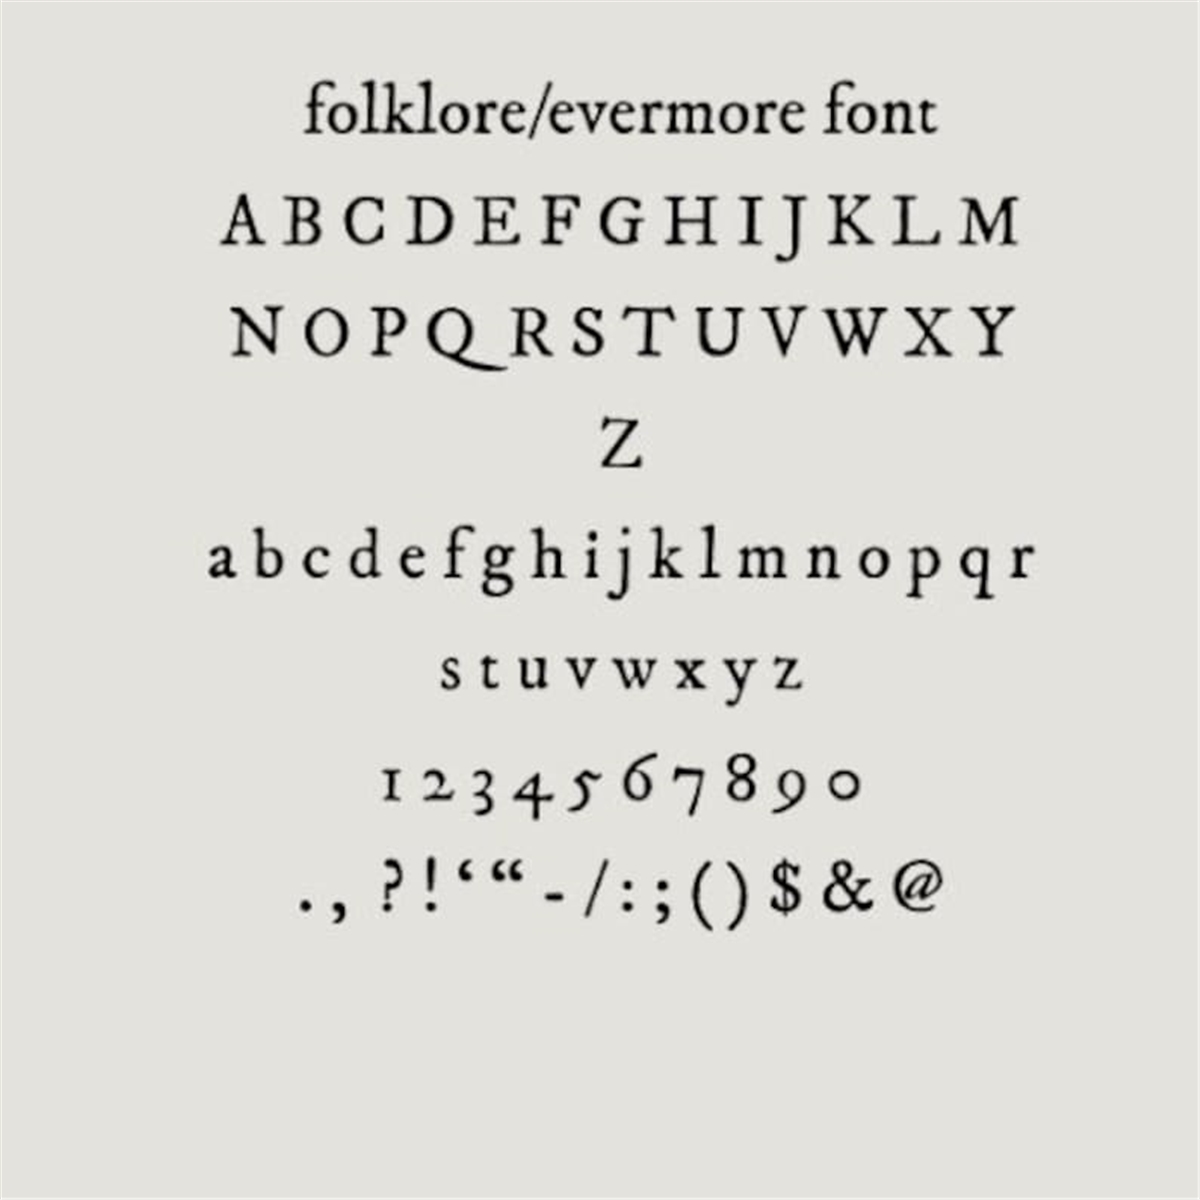 folkloreevermore-font-svg-and-png-taylor-swift-eras-image-1